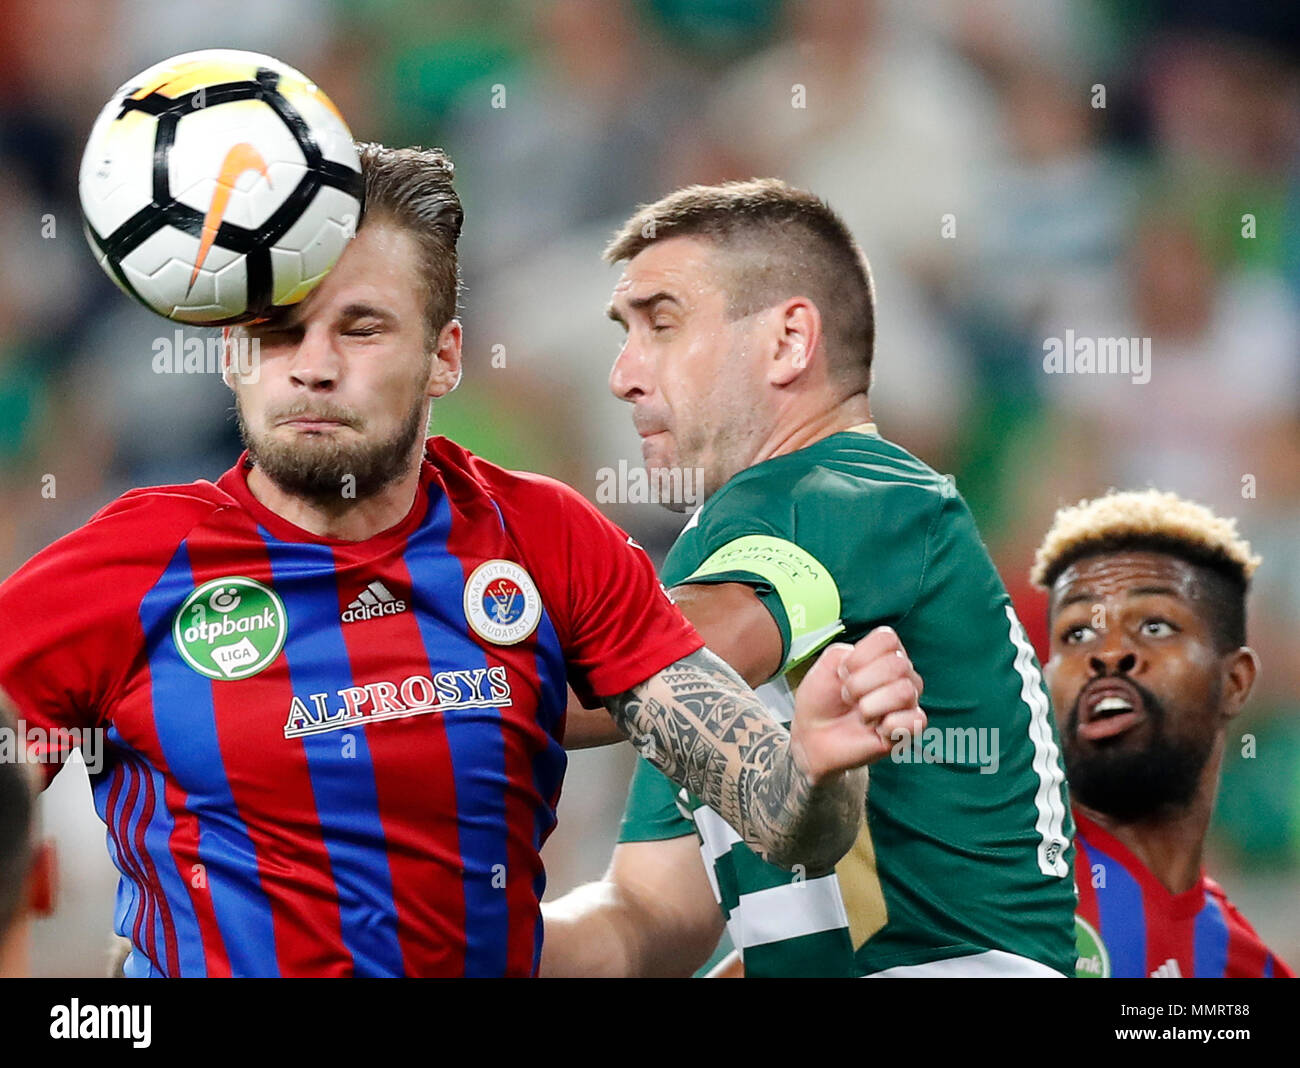 BUDAPEST, HUNGARY - MAY 12: (l-r) Vit Benes of Vasas FC wins the ball from Daniel Bode of Ferencvarosi TC in front of Manjrekar James of Vasas FC during the Hungarian OTP Bank Liga match between Ferencvarosi TC and Vasas FC at Groupama Arena on May 12, 2018 in Budapest, Hungary. Stock Photo